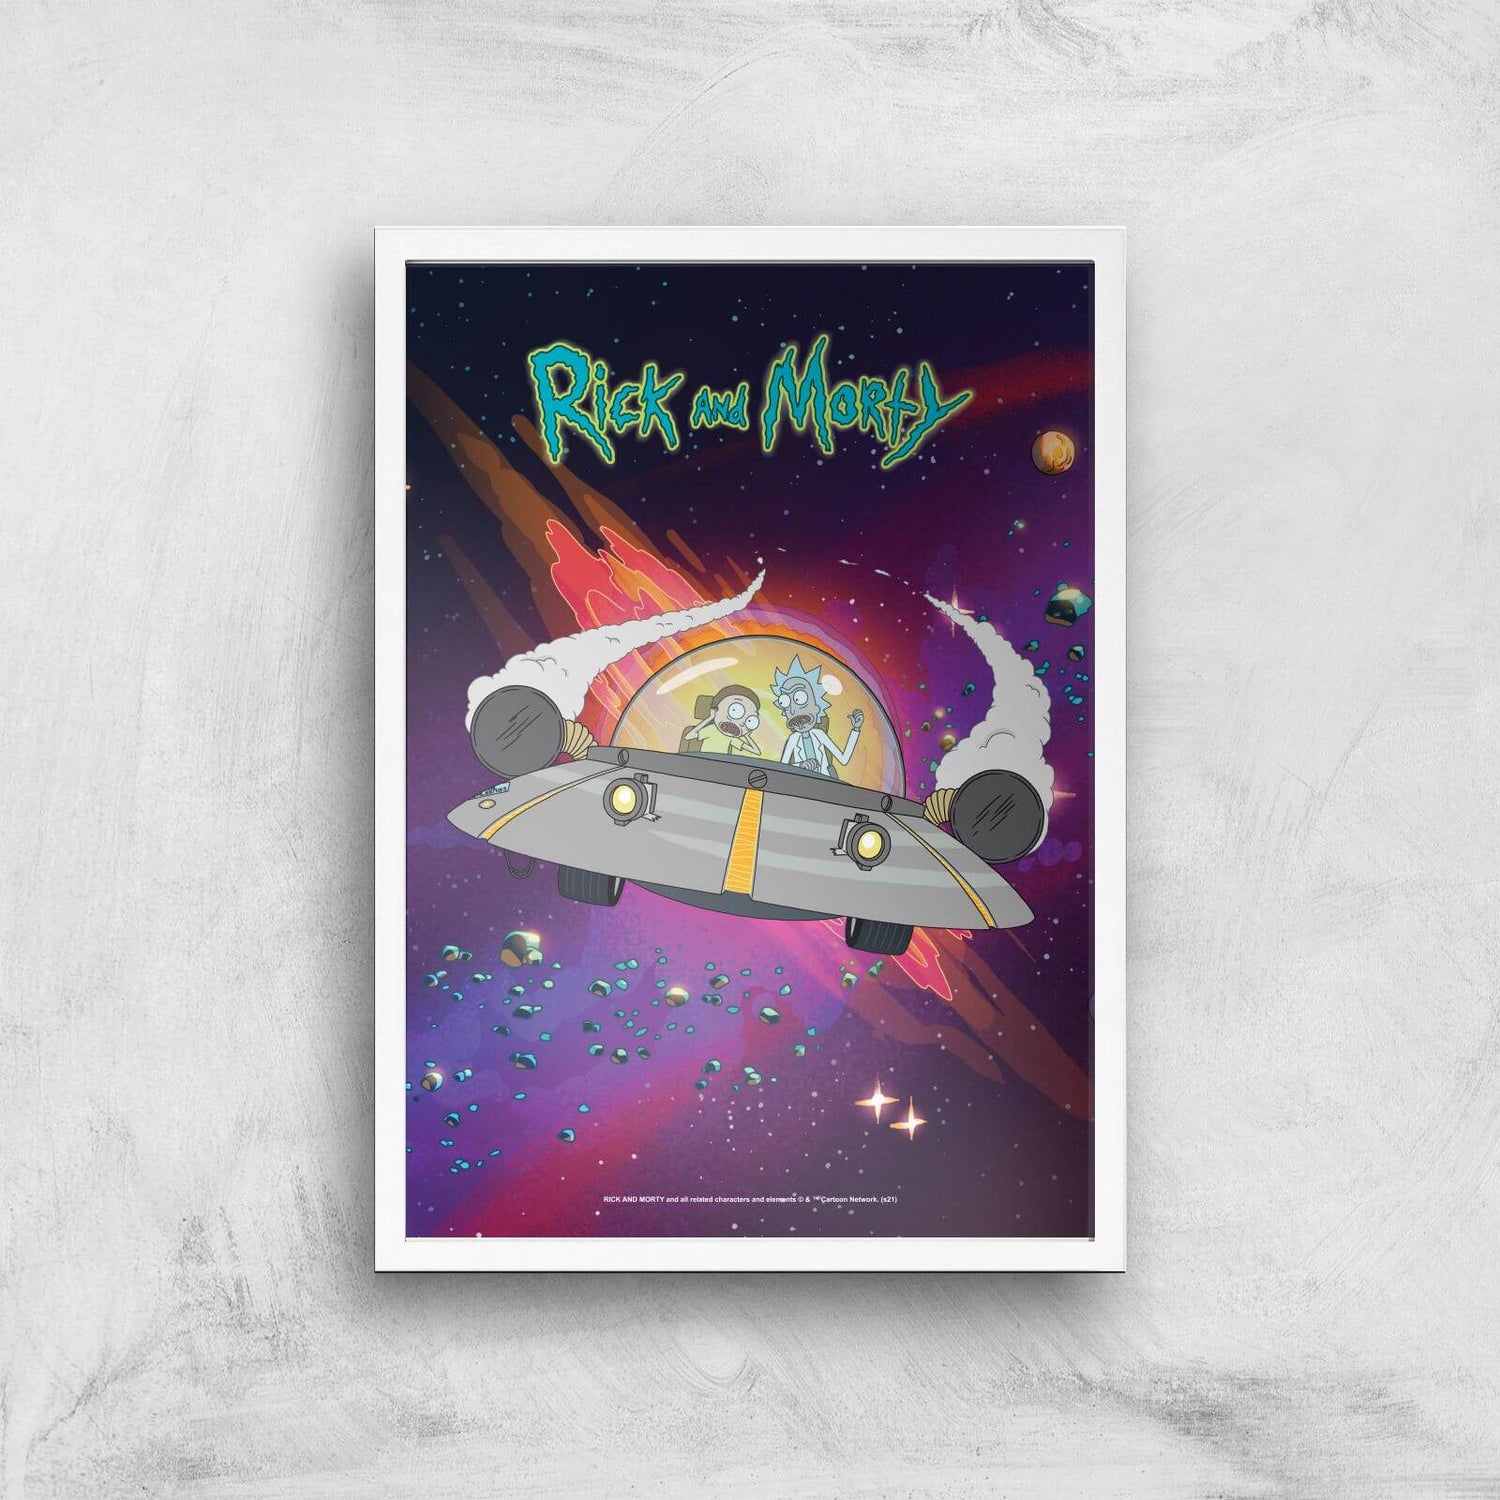 Rick and Morty Rocket Adventure Giclee Art Print - A2 - White Frame